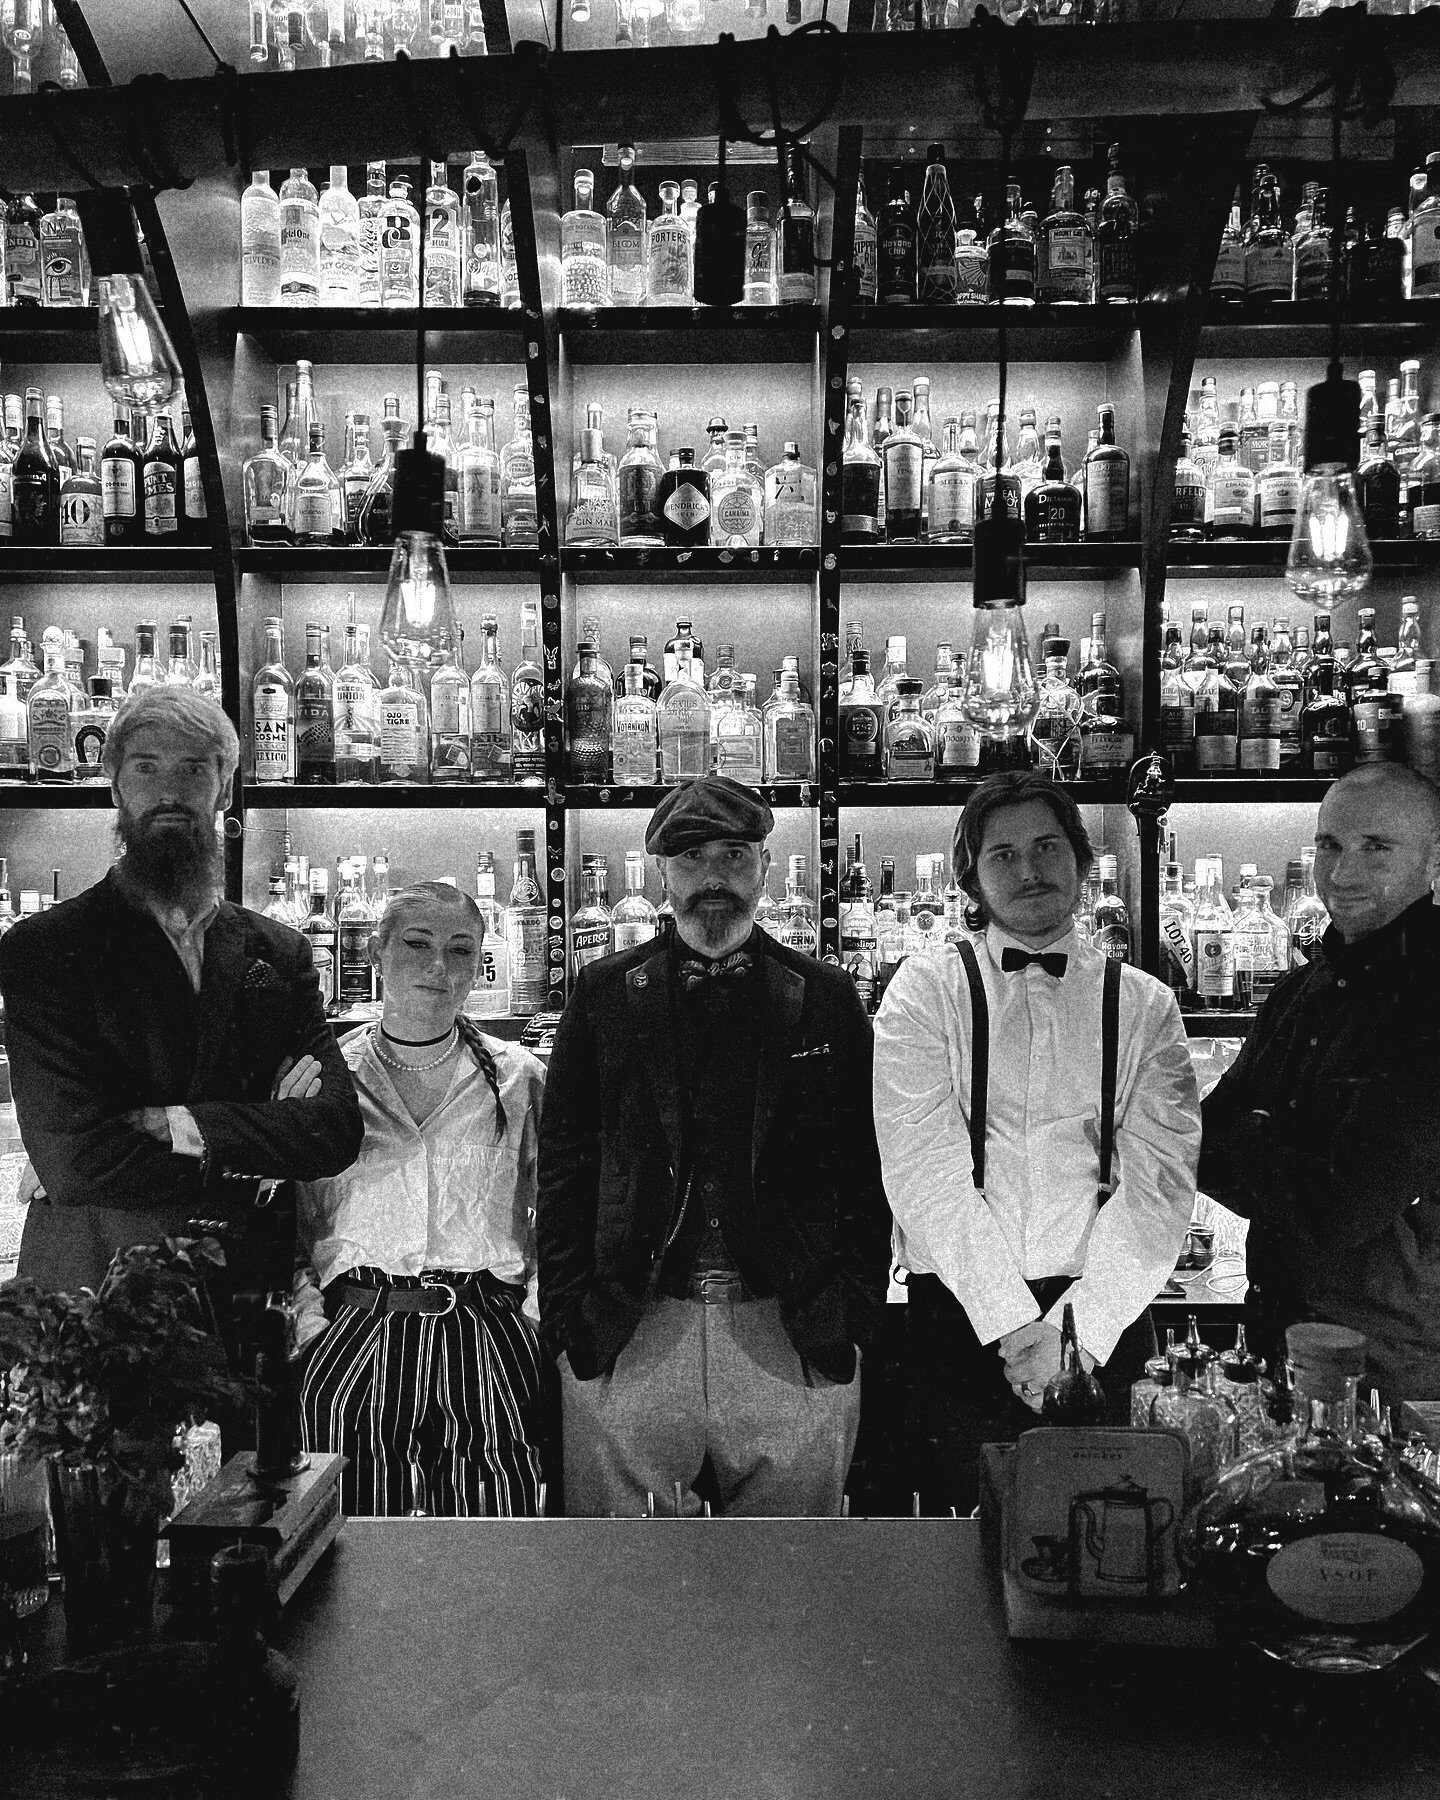 Prohibition only drives drunkenness behind and into dark places , and does not cure it or even diminish it.
.
.
.
#prohibitionweekend #prohibition #prohibitionbar #prohibitioncocktail #worthingbars #50bestbars #oldies 
#cocktailforyou #cocktailporn #